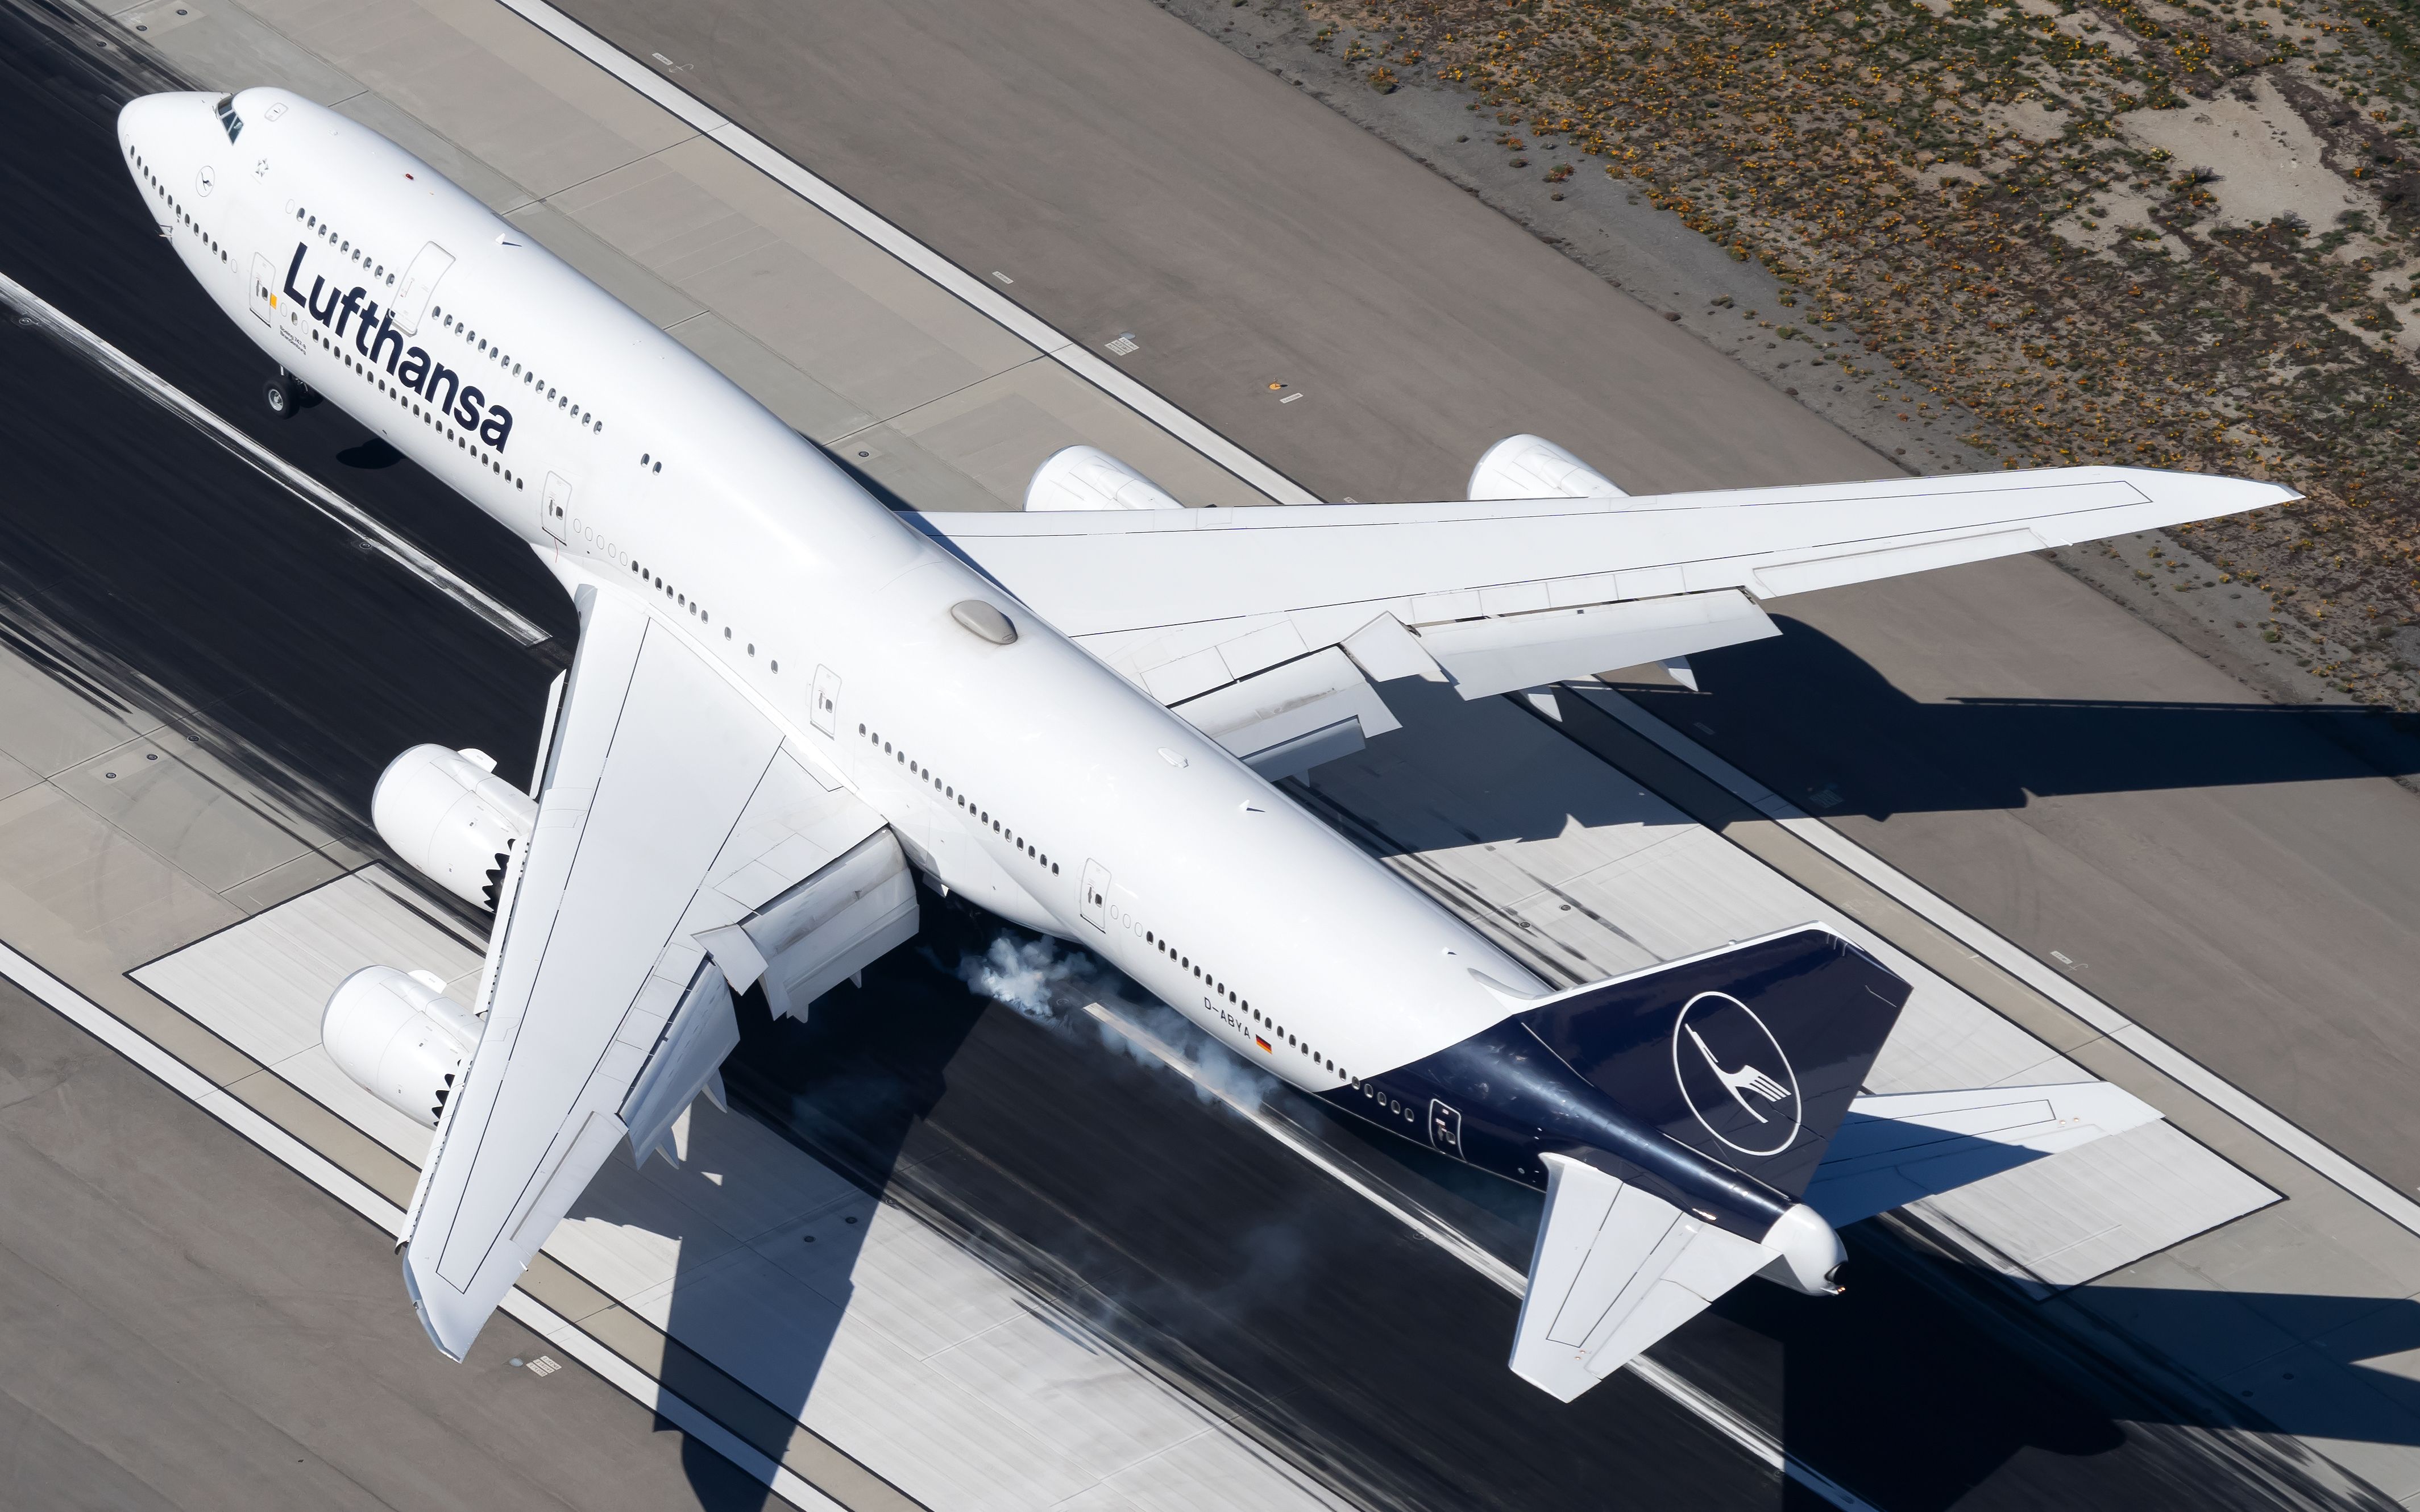 20 Routes: Where Lufthansa Is Flying Its Boeing 747s This Winter